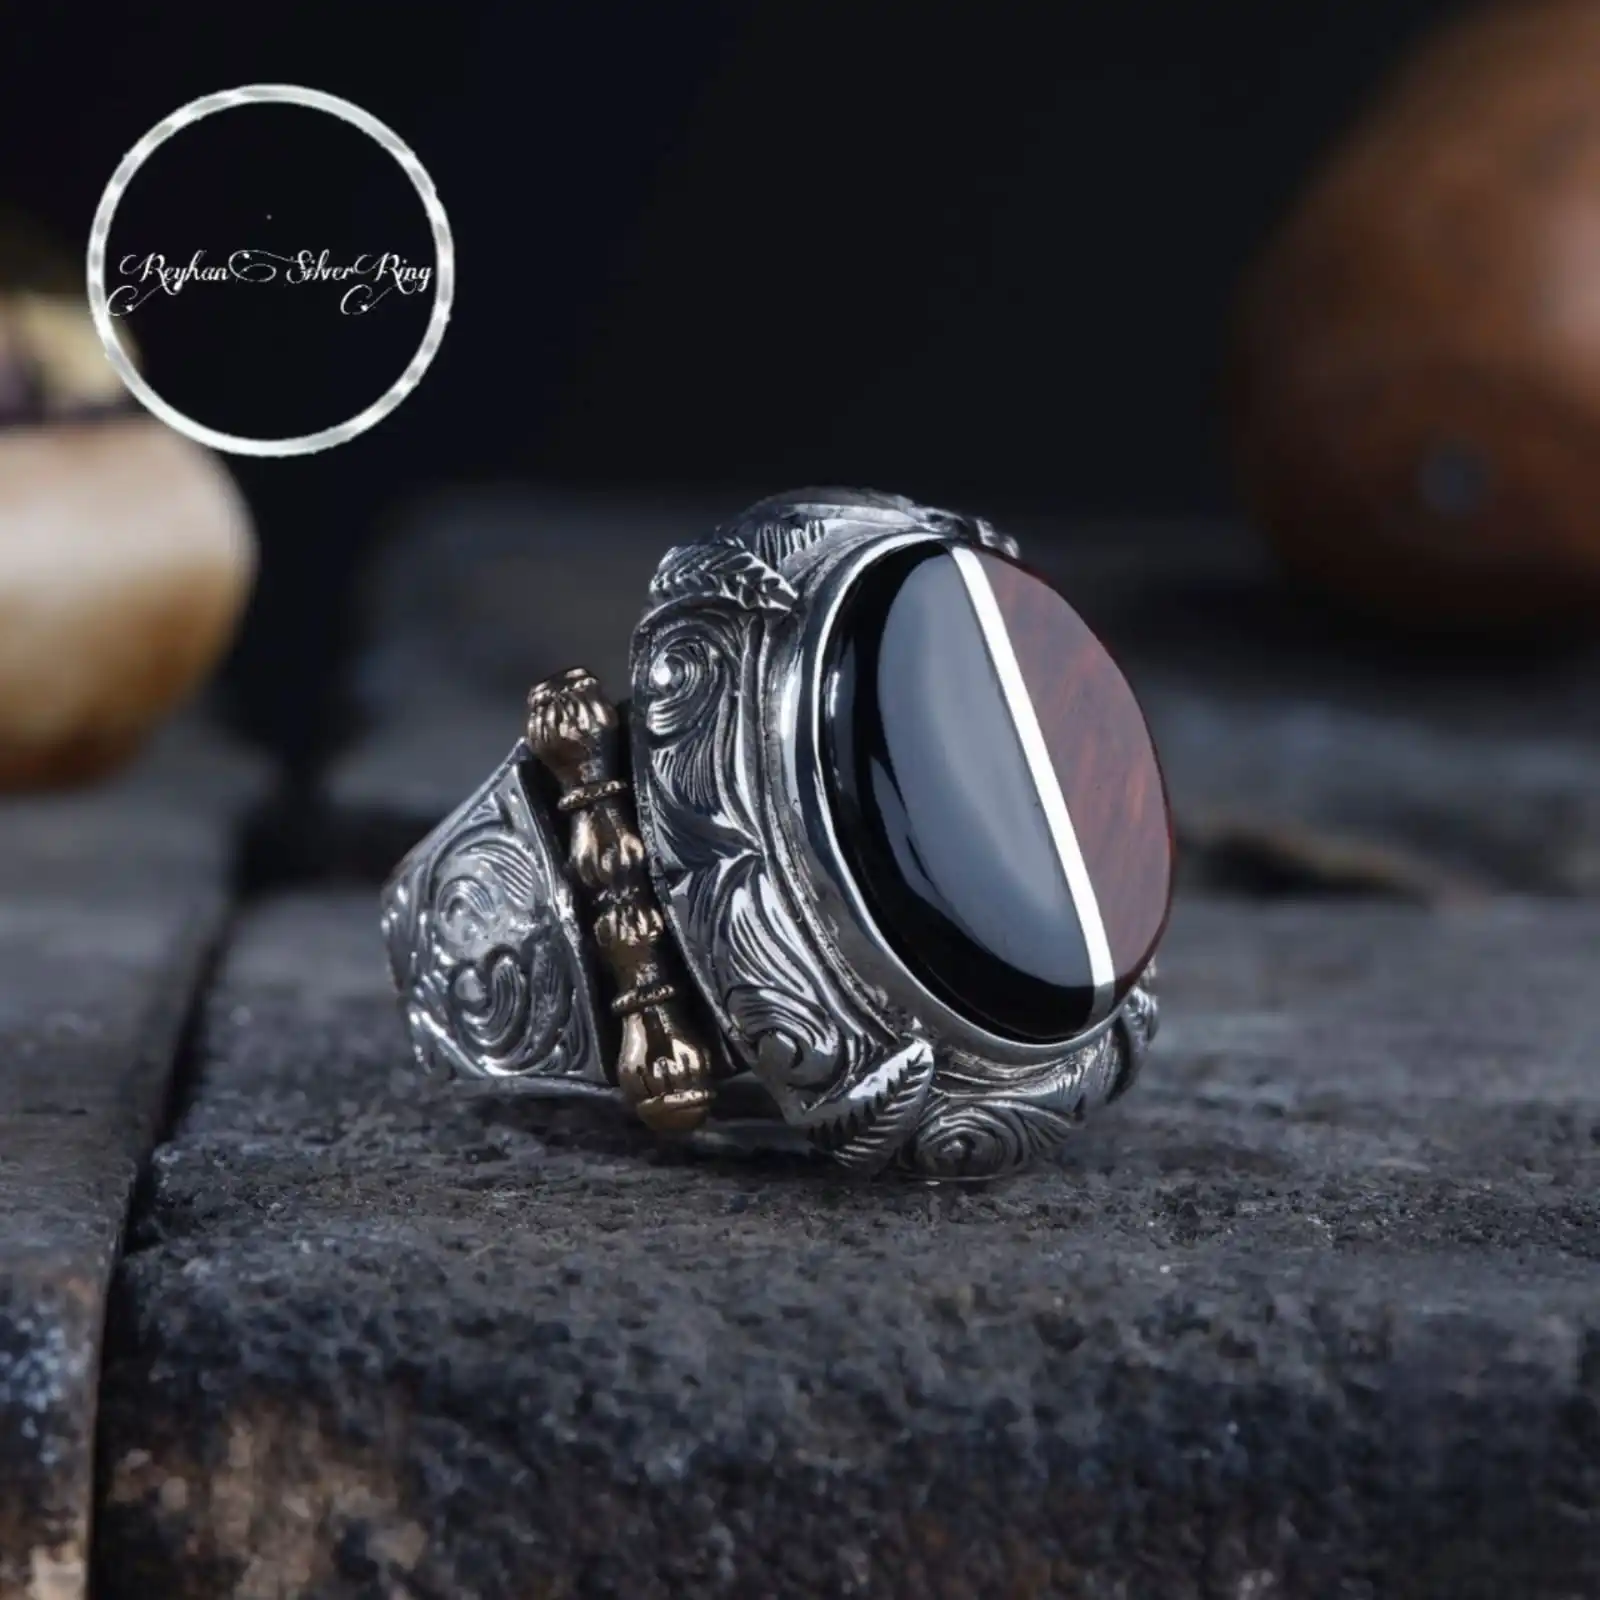 Handcrafted Silver Inlaid Men's Ring with Coca and Oltu Stone - Unique Splitting and Pencil Engraved Design jewelry ring setter clamp tool engraving ball diamond stone set with 7 dies making jewellery goldsmith tools